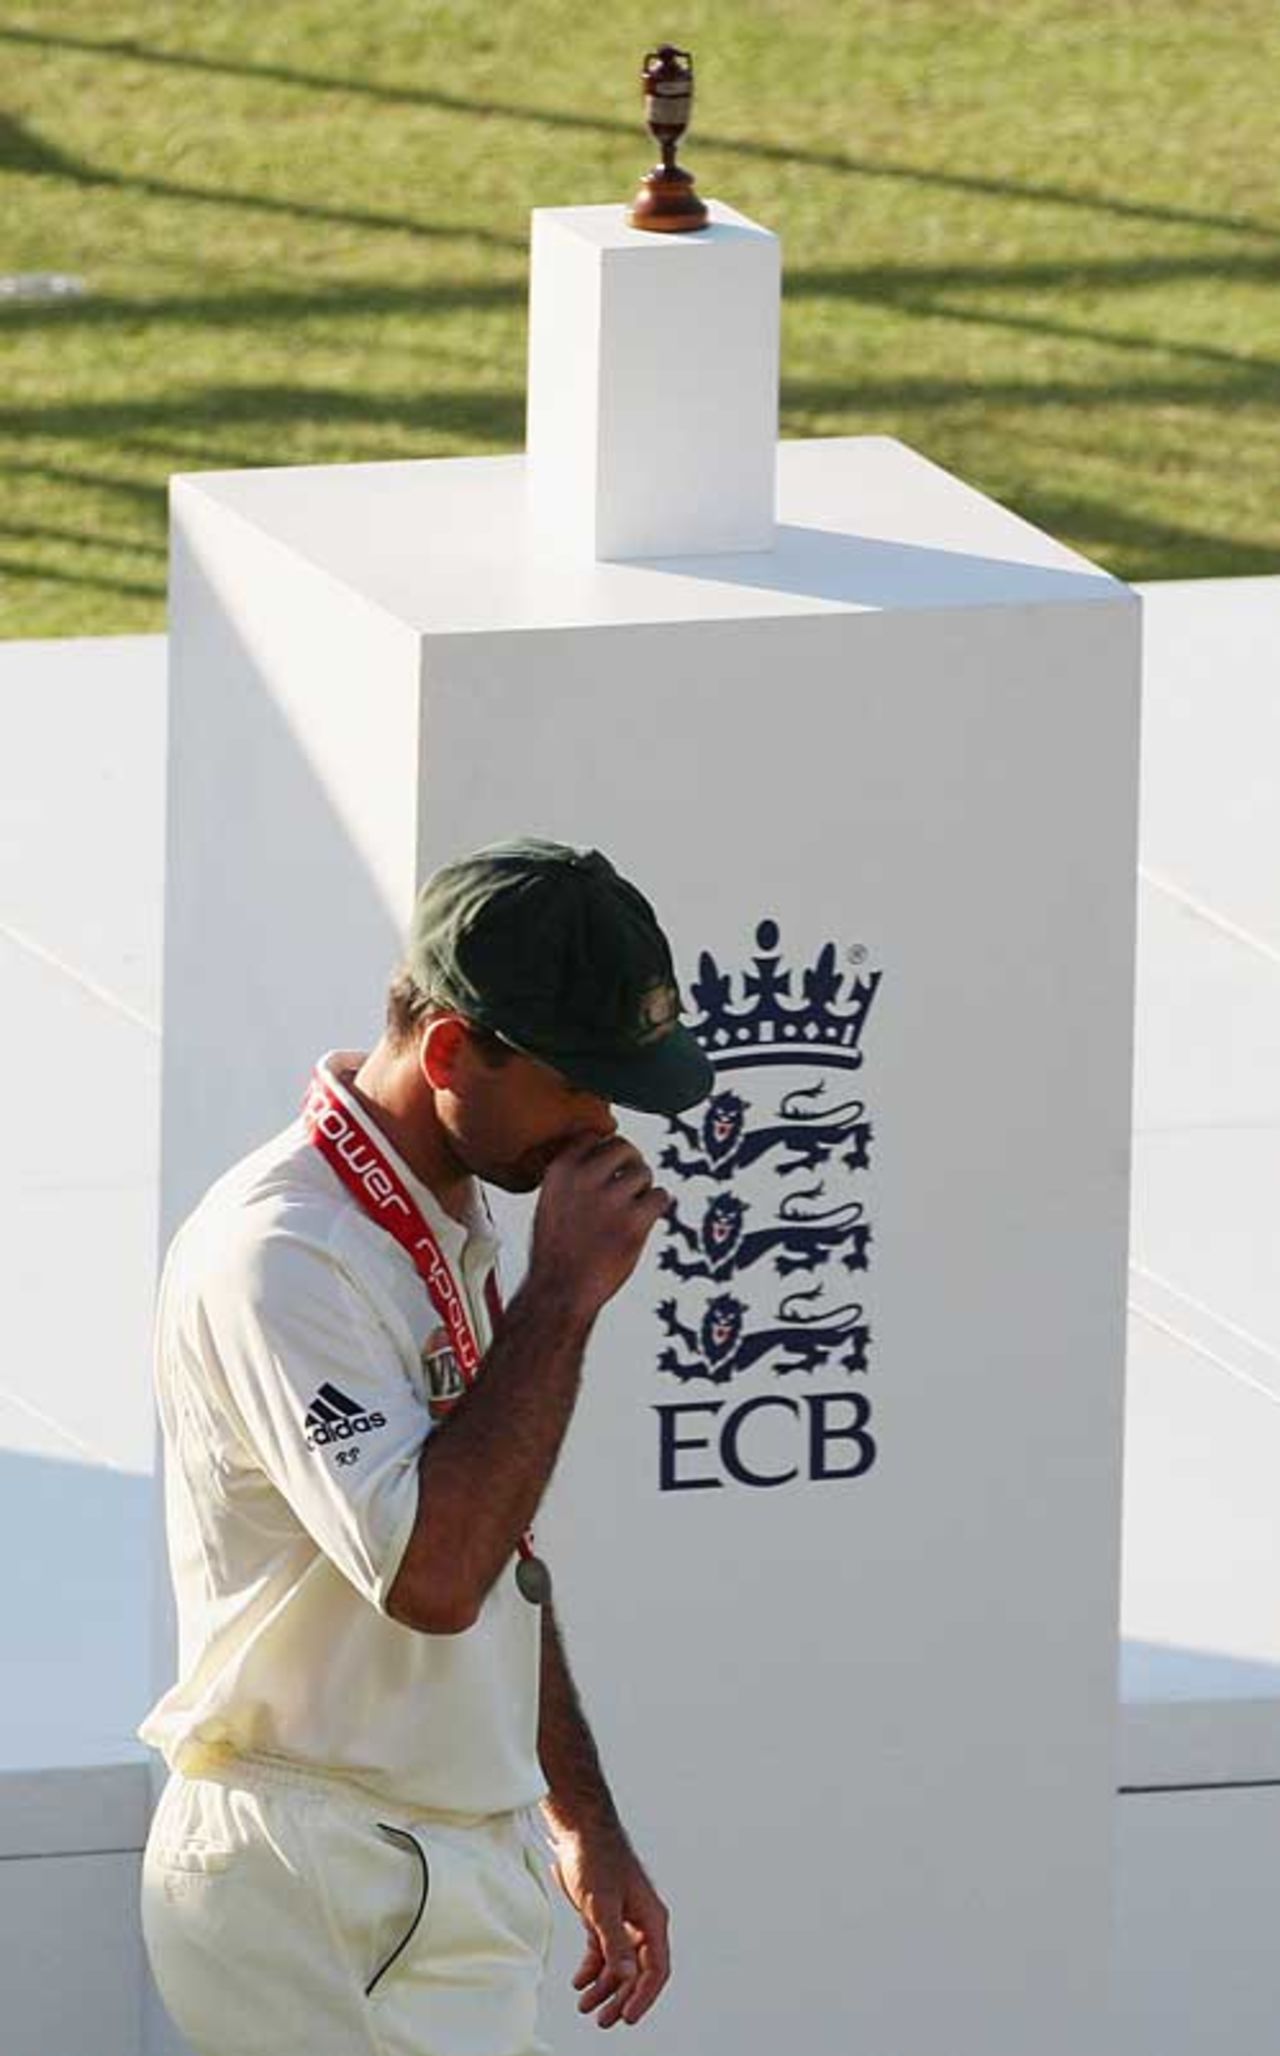 Ricky Ponting doesn't look at the prize that got away, England v Australia, 5th Test, The Oval, 4th day, August 23, 2009